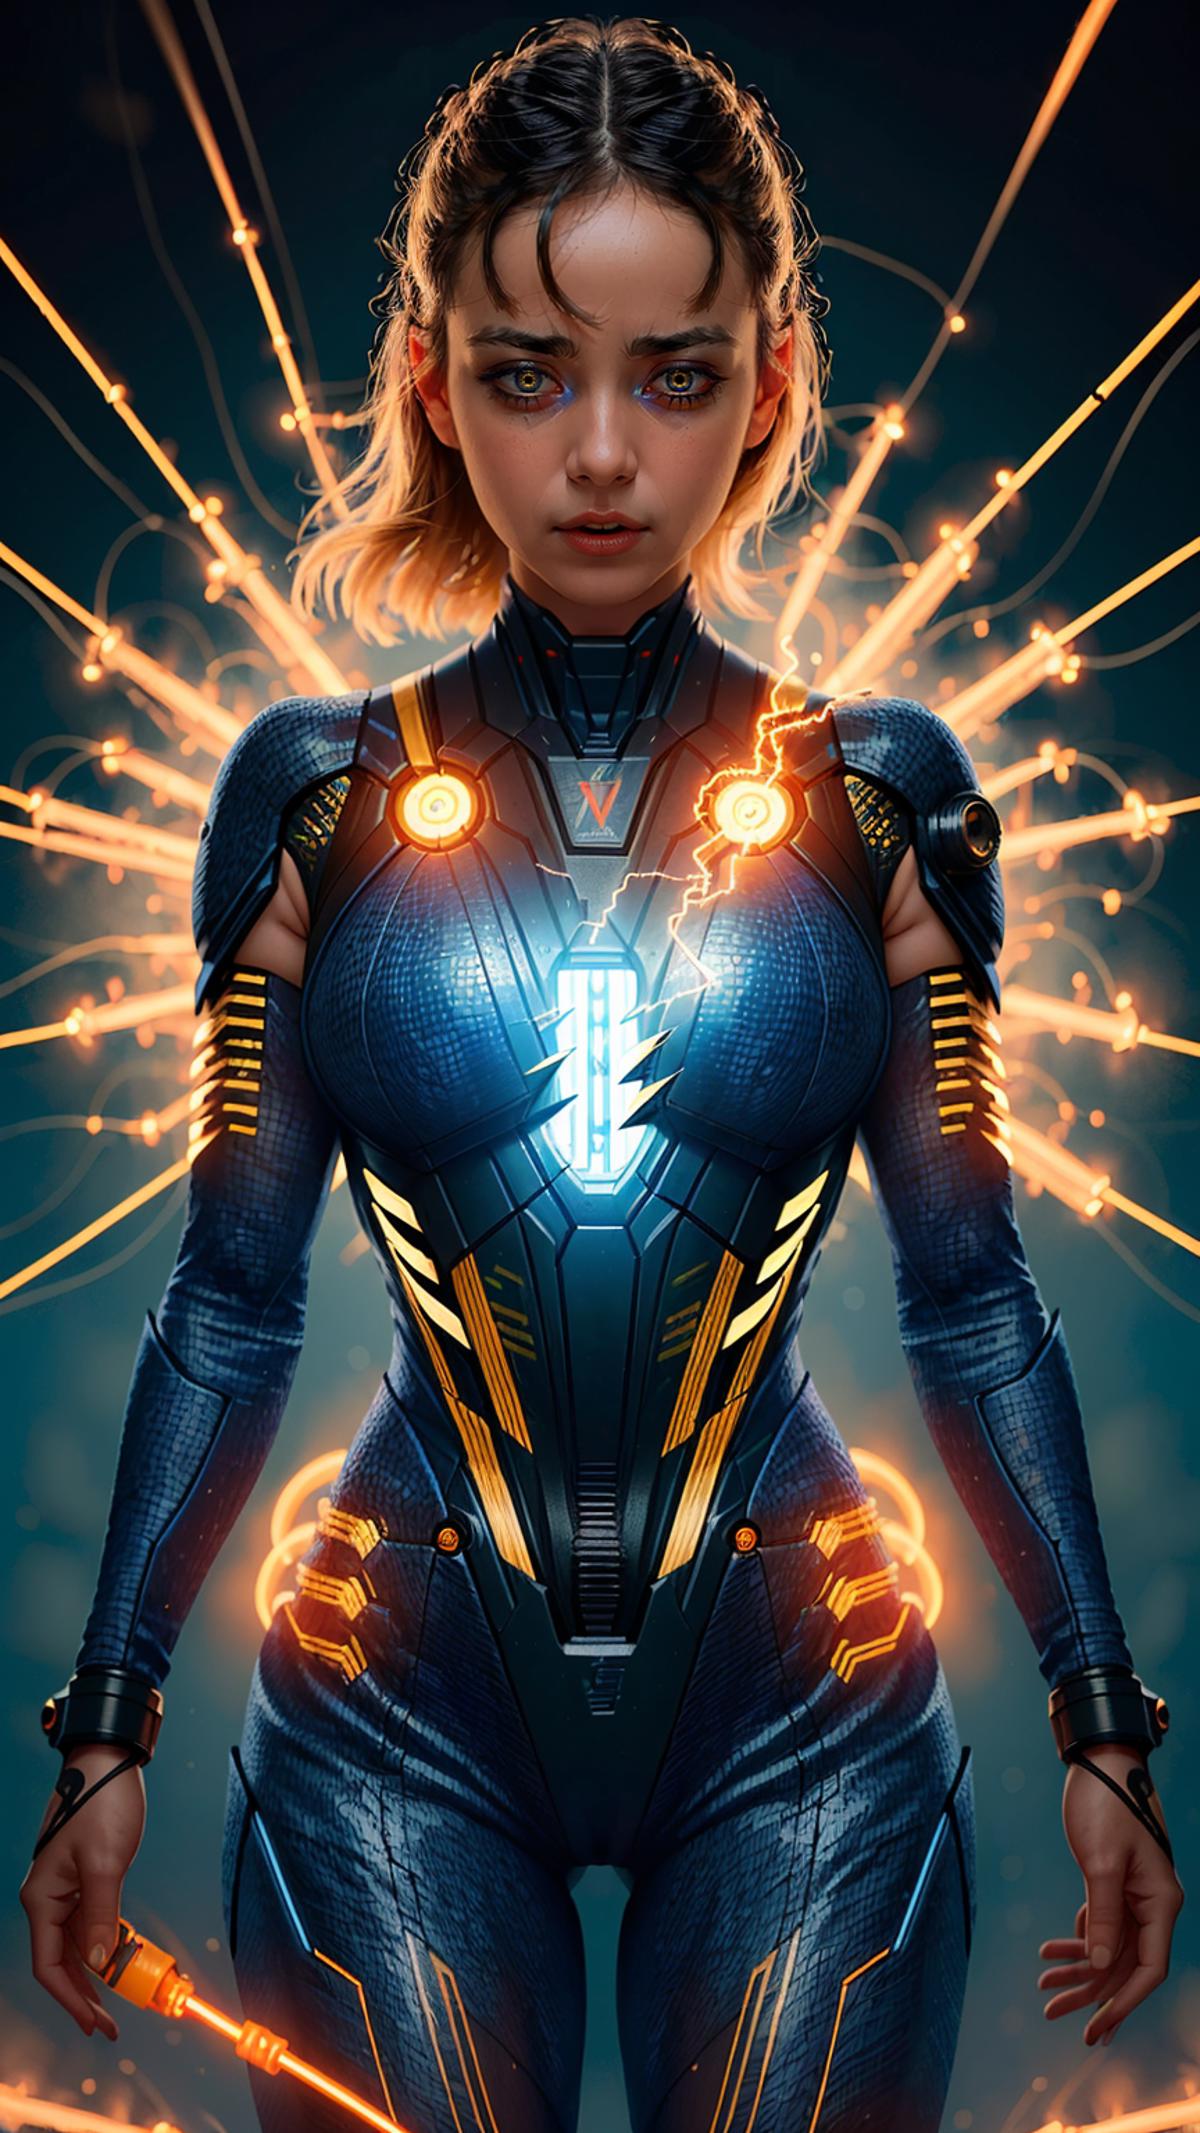 A woman in a blue, black, and yellow armor is the centerpiece of the image. She is wearing a unique outfit that is reminiscent of a futuristic or sci-fi character, complete with a sword. The design of her armor is intricate and eye-catching, making her the focal point of the scene. The image has a vibrant and dynamic quality, with sparkling lights and an overall sense of energy. The woman's striking appearance and the visually engaging elements of the image make it an attractive piece for view